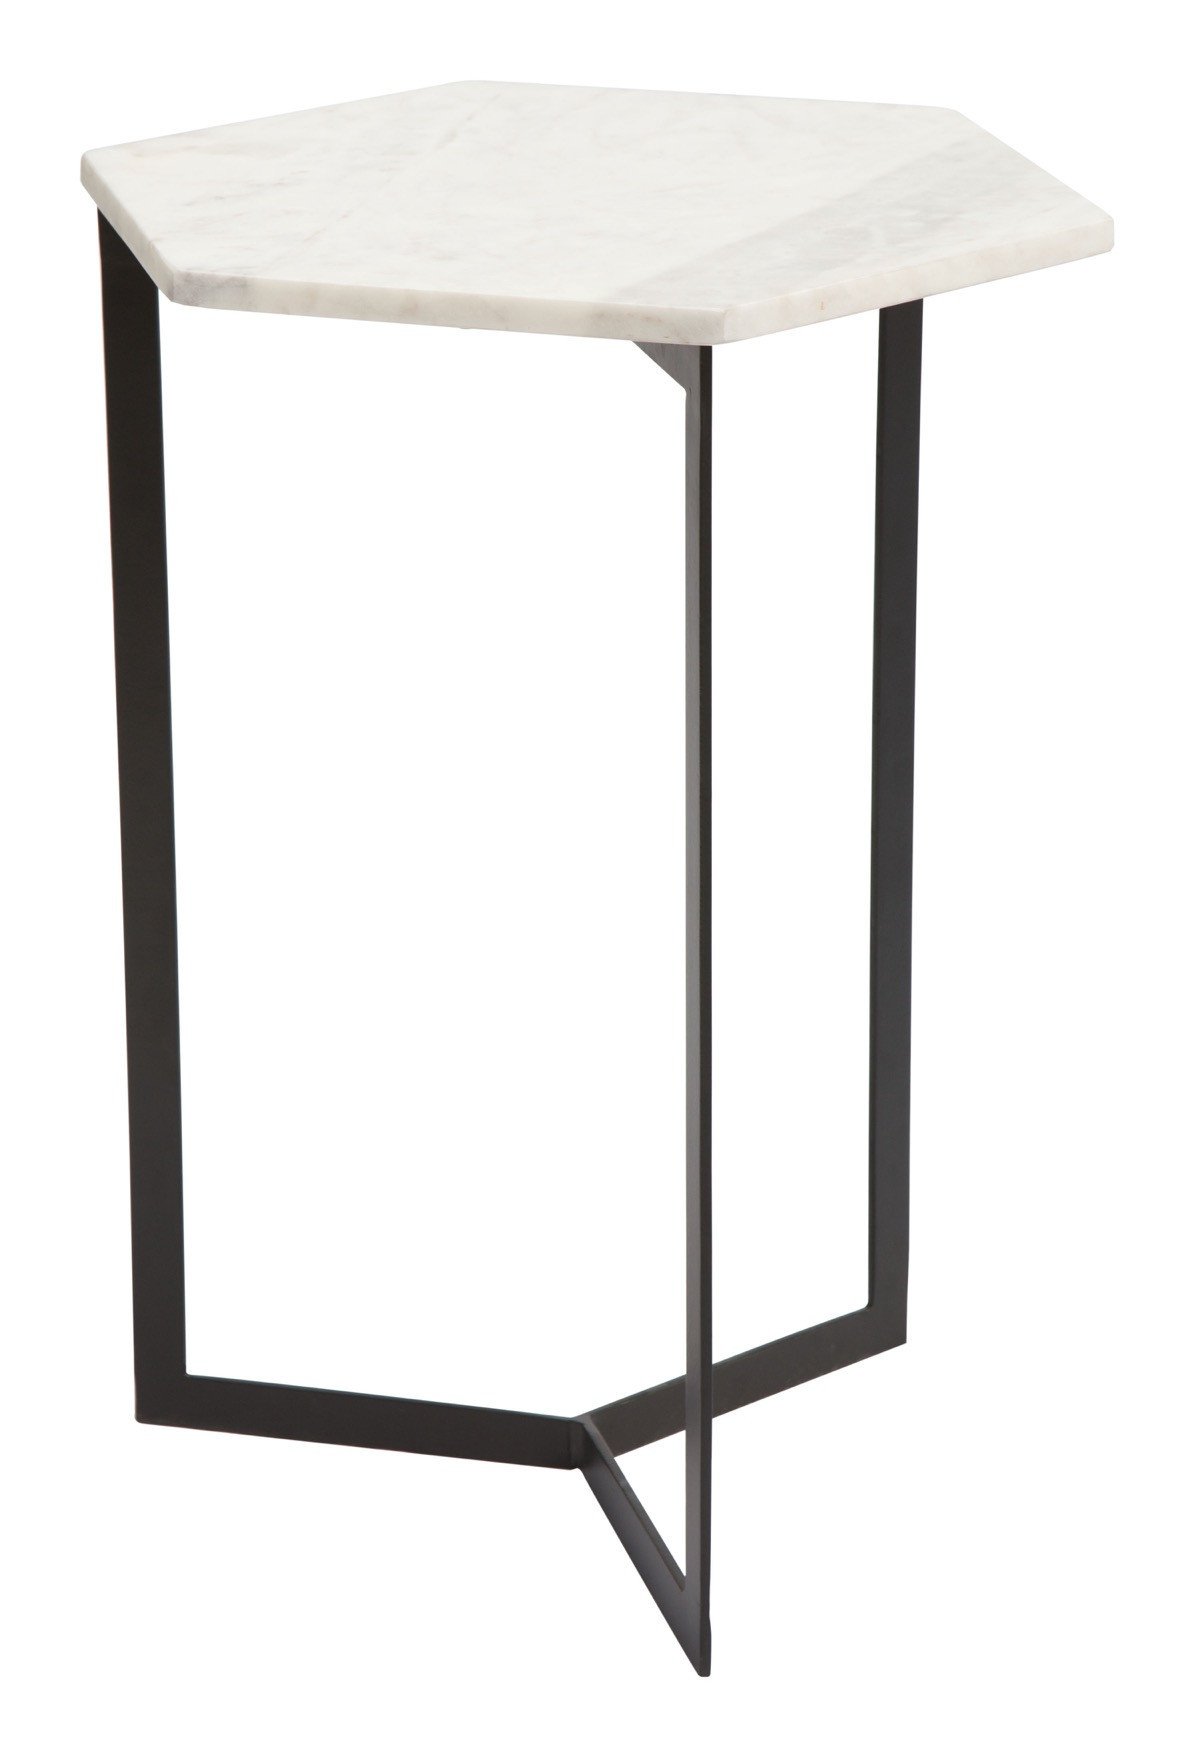 rys accent table with hexagon white faux marble top black iron base side tables alan decor shelf glass patio end bengal manor mango wood twist unfinished chairs counter height bar